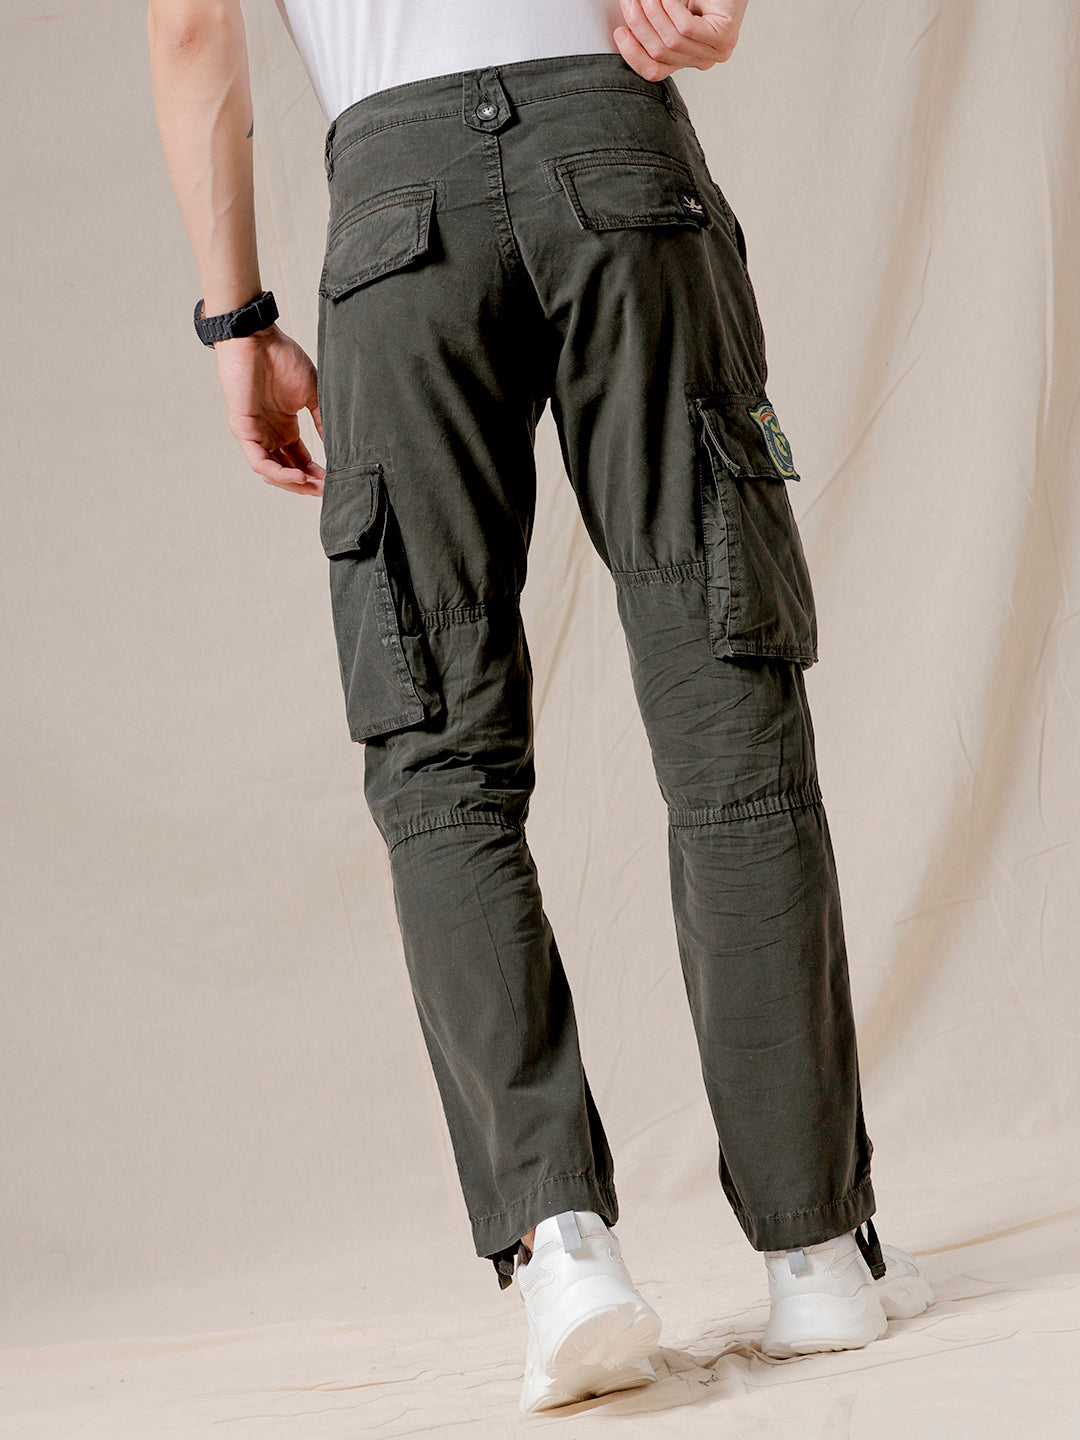 Olive Twill Cargo Pants - Firefly